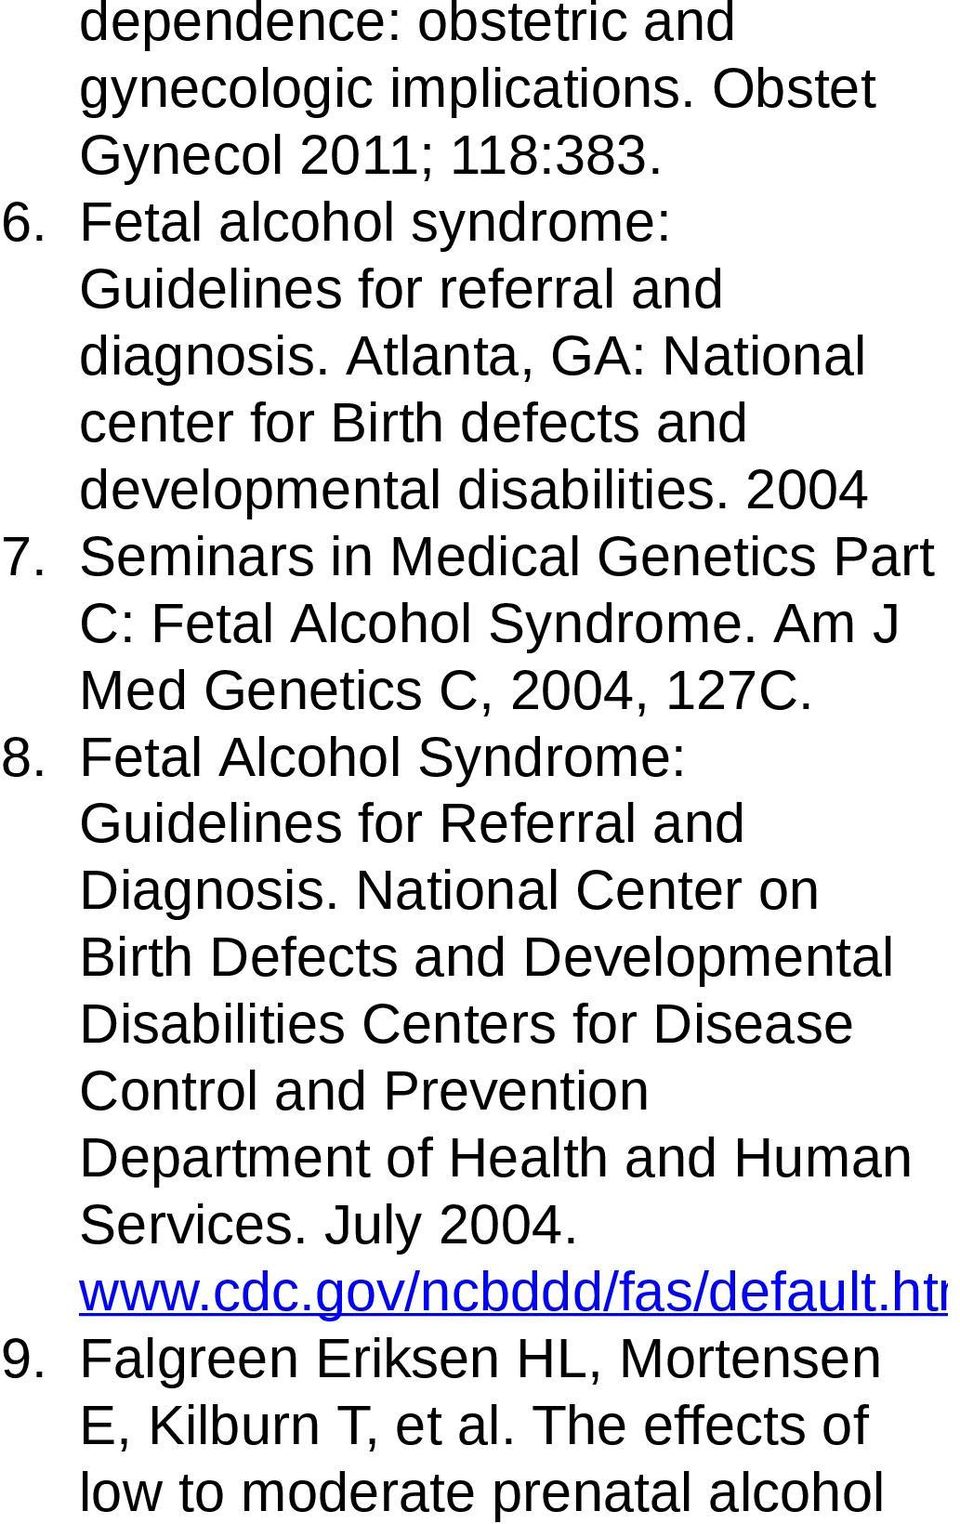 Am J Med Genetics C, 2004, 127C. 8. Fetal Alcohol Syndrome: Guidelines for Referral and Diagnosis.